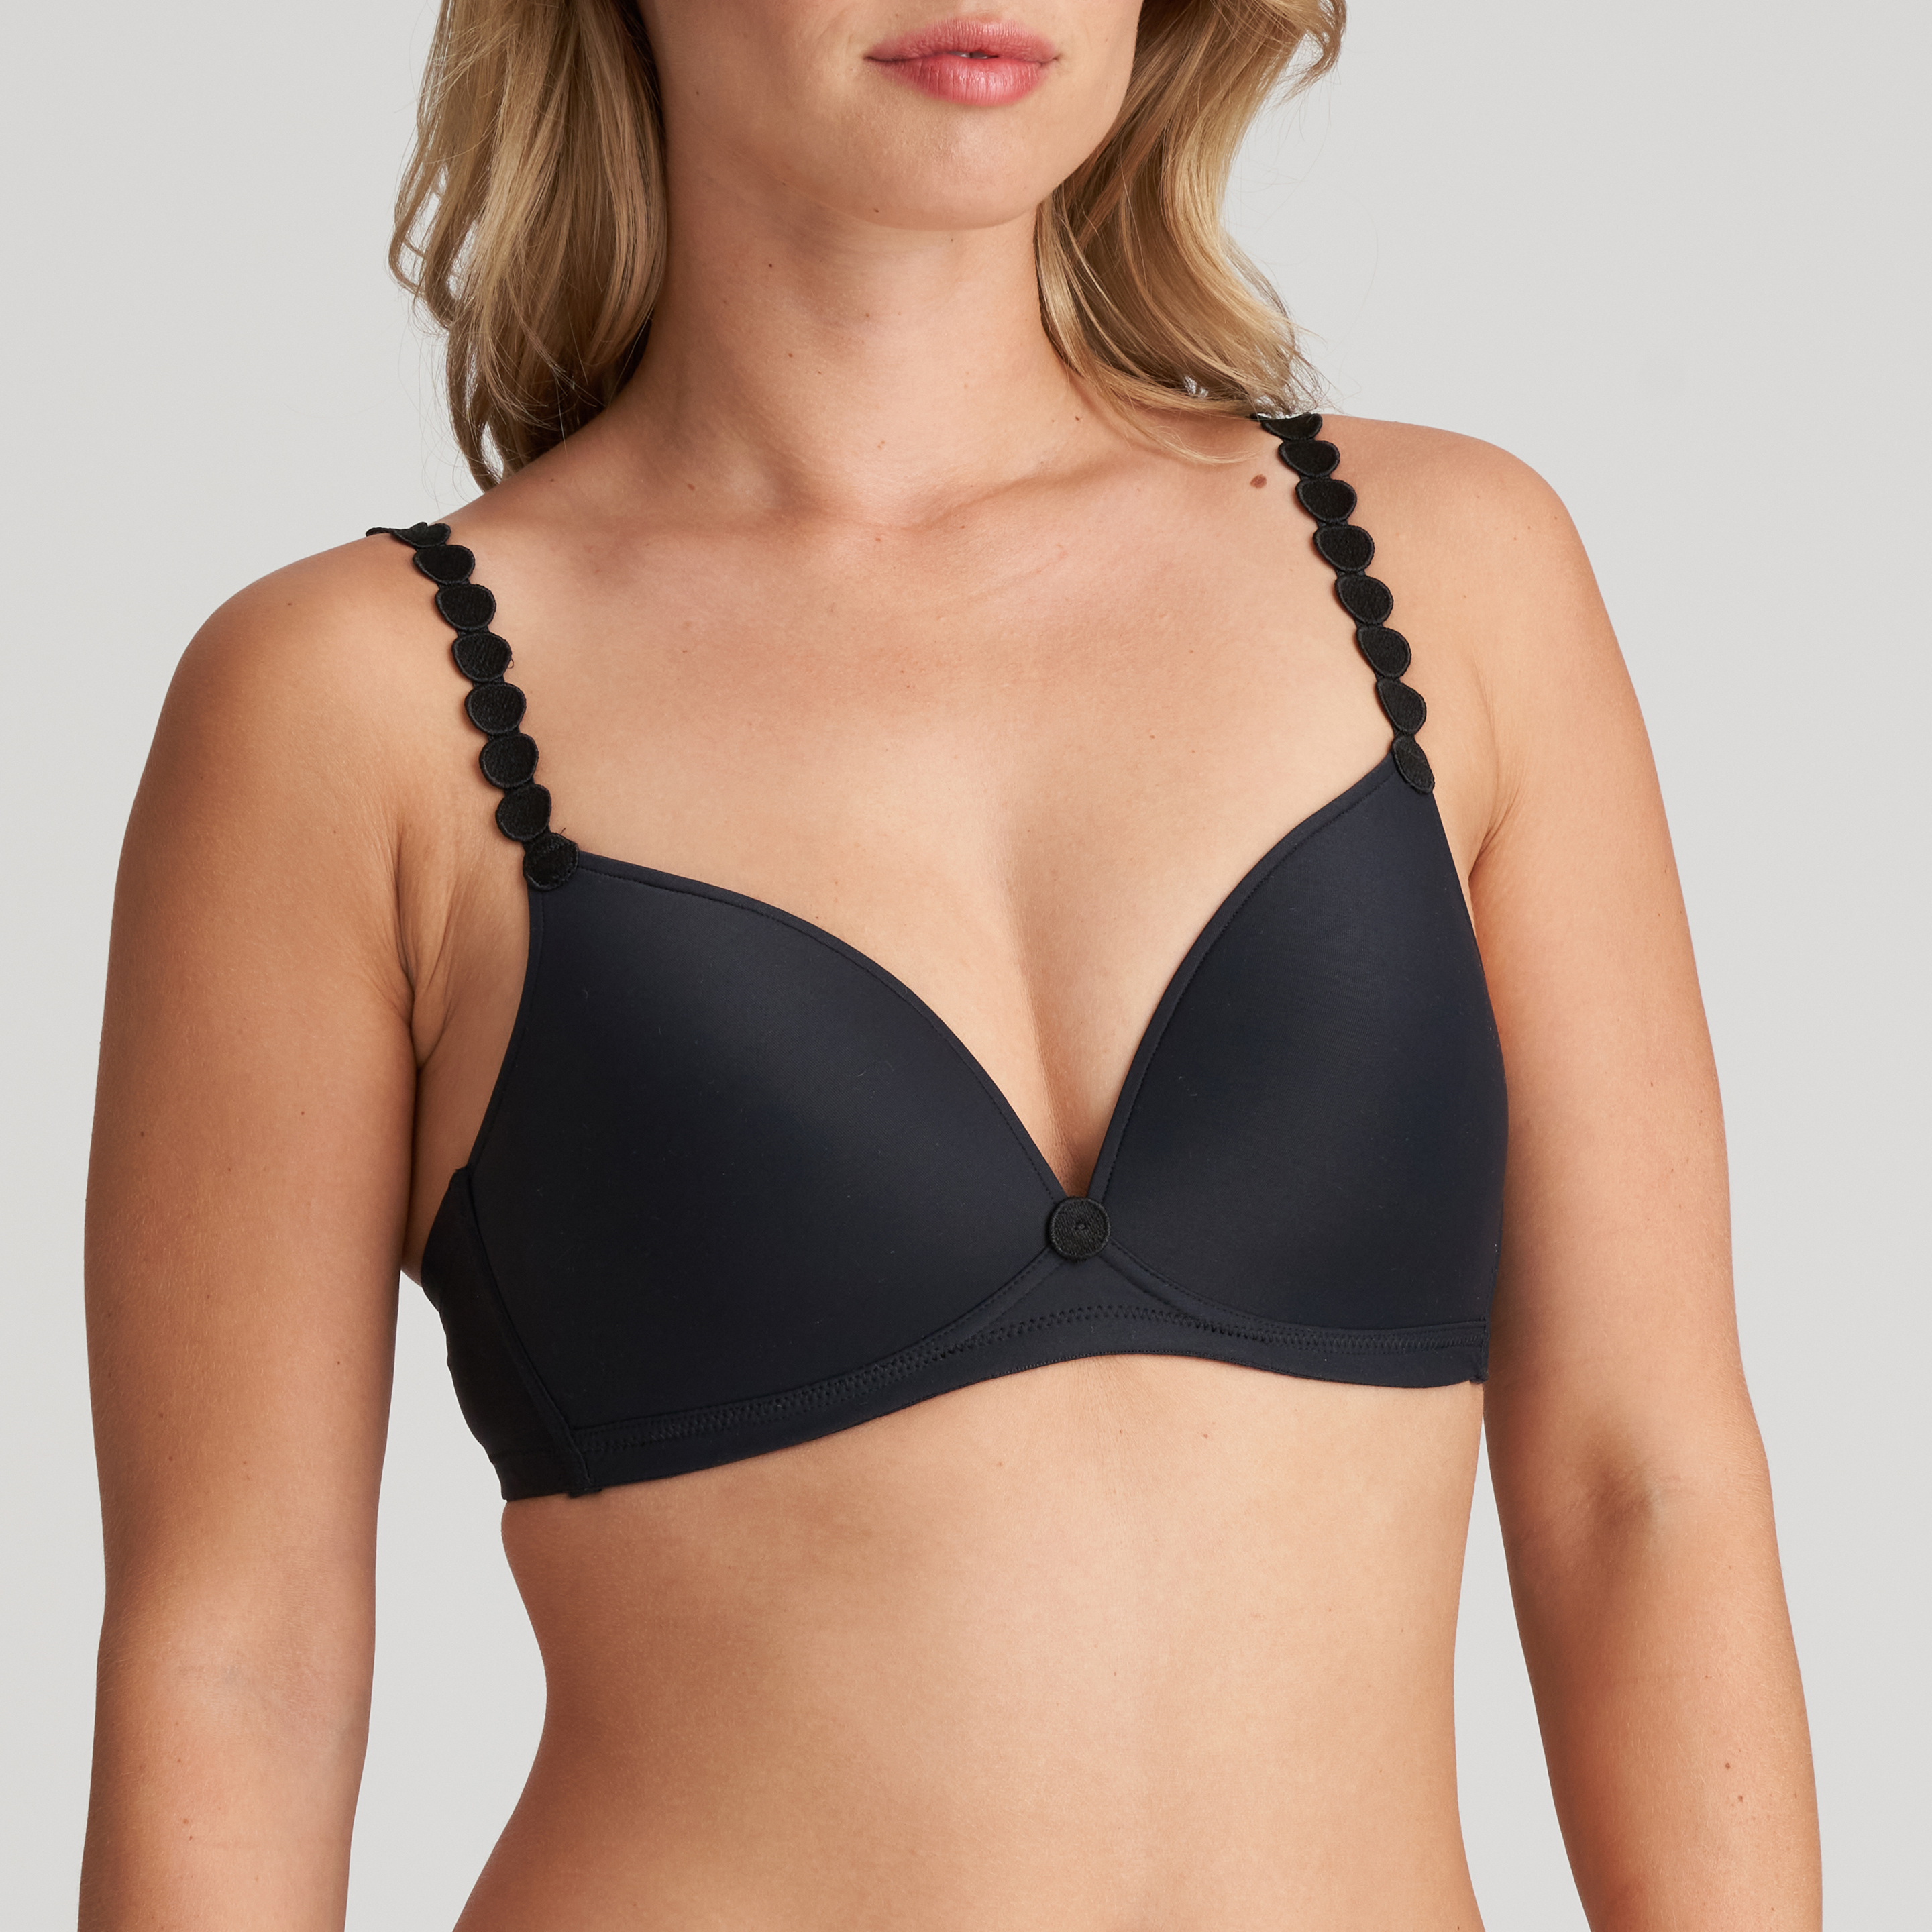 MY TOP DRAWER on Instagram: Pick of the Fitter- One of our Burlington  fitters, Katie recommends the Marie Jo Tom as her go-to T-shirt bra! “This  has got to be one of